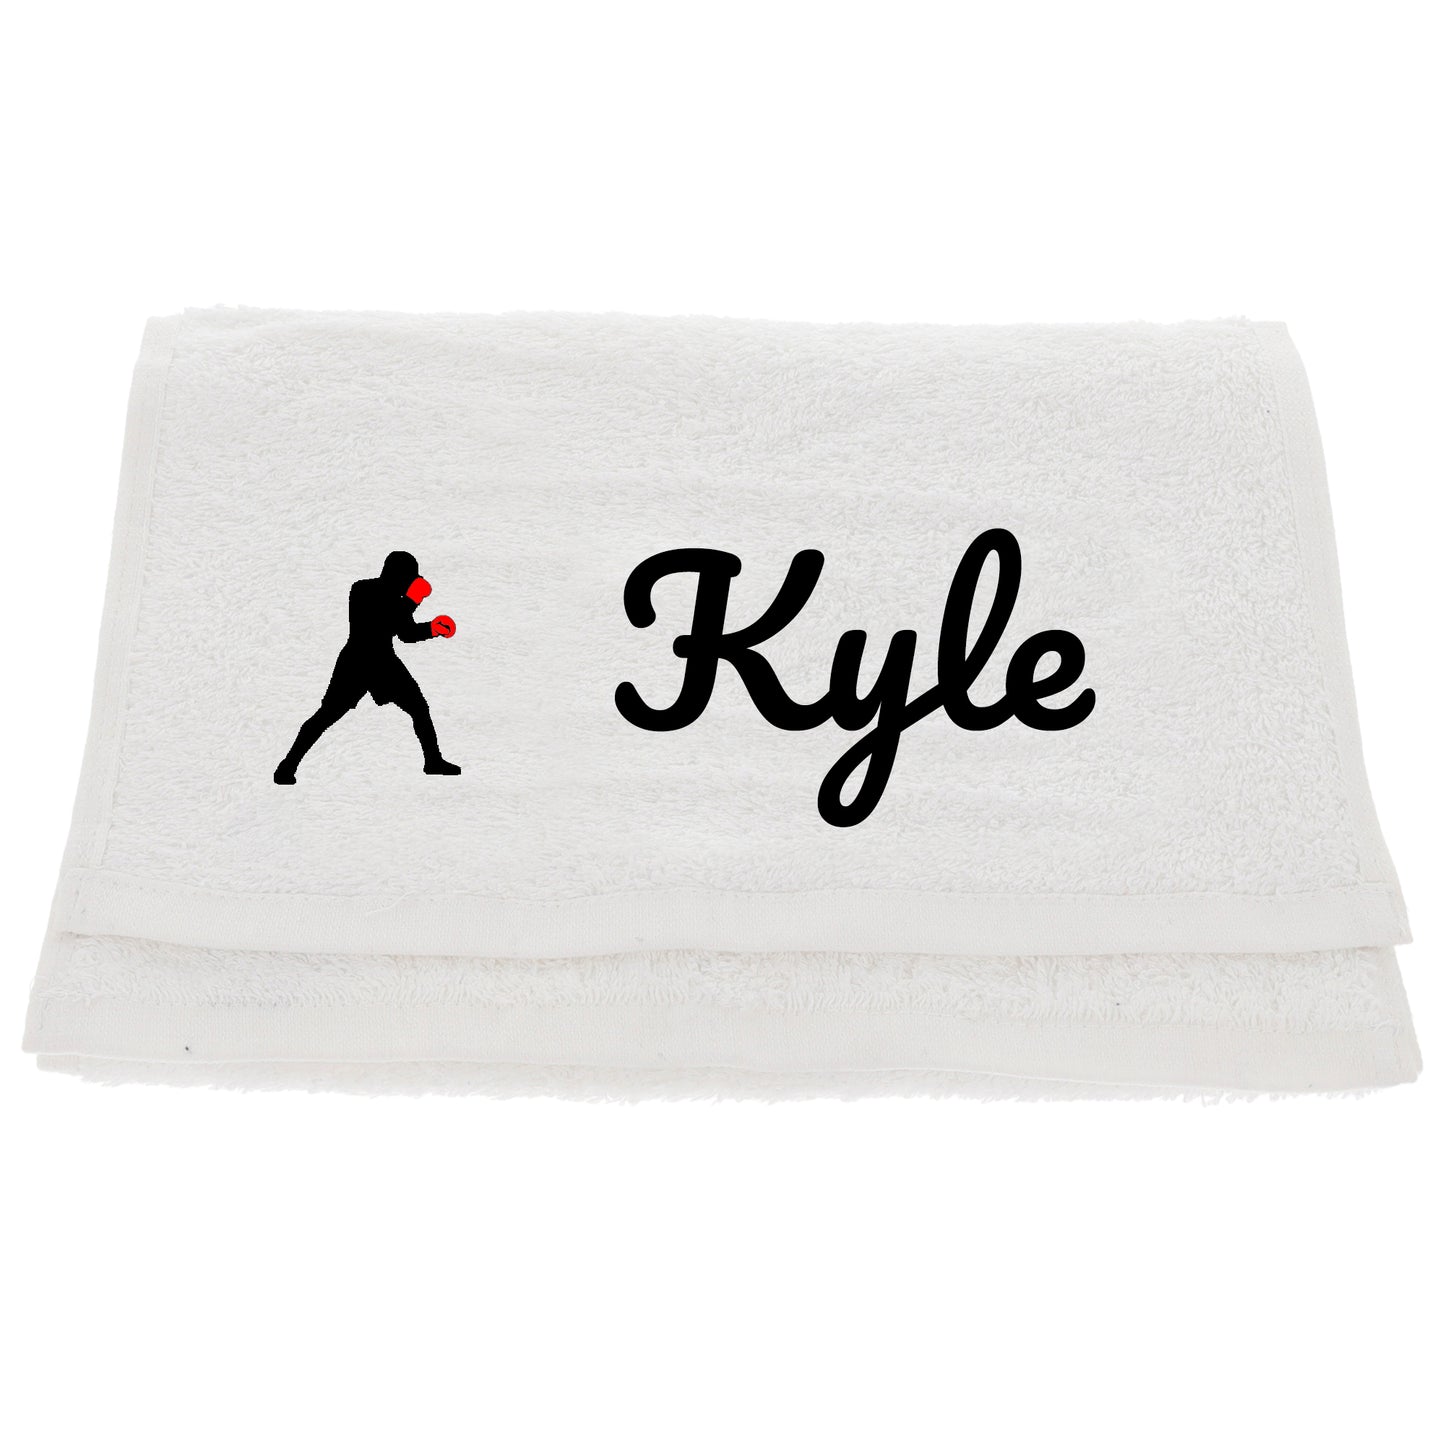 Personalised Embroidered Boxing Towel  - Always Looking Good - White  